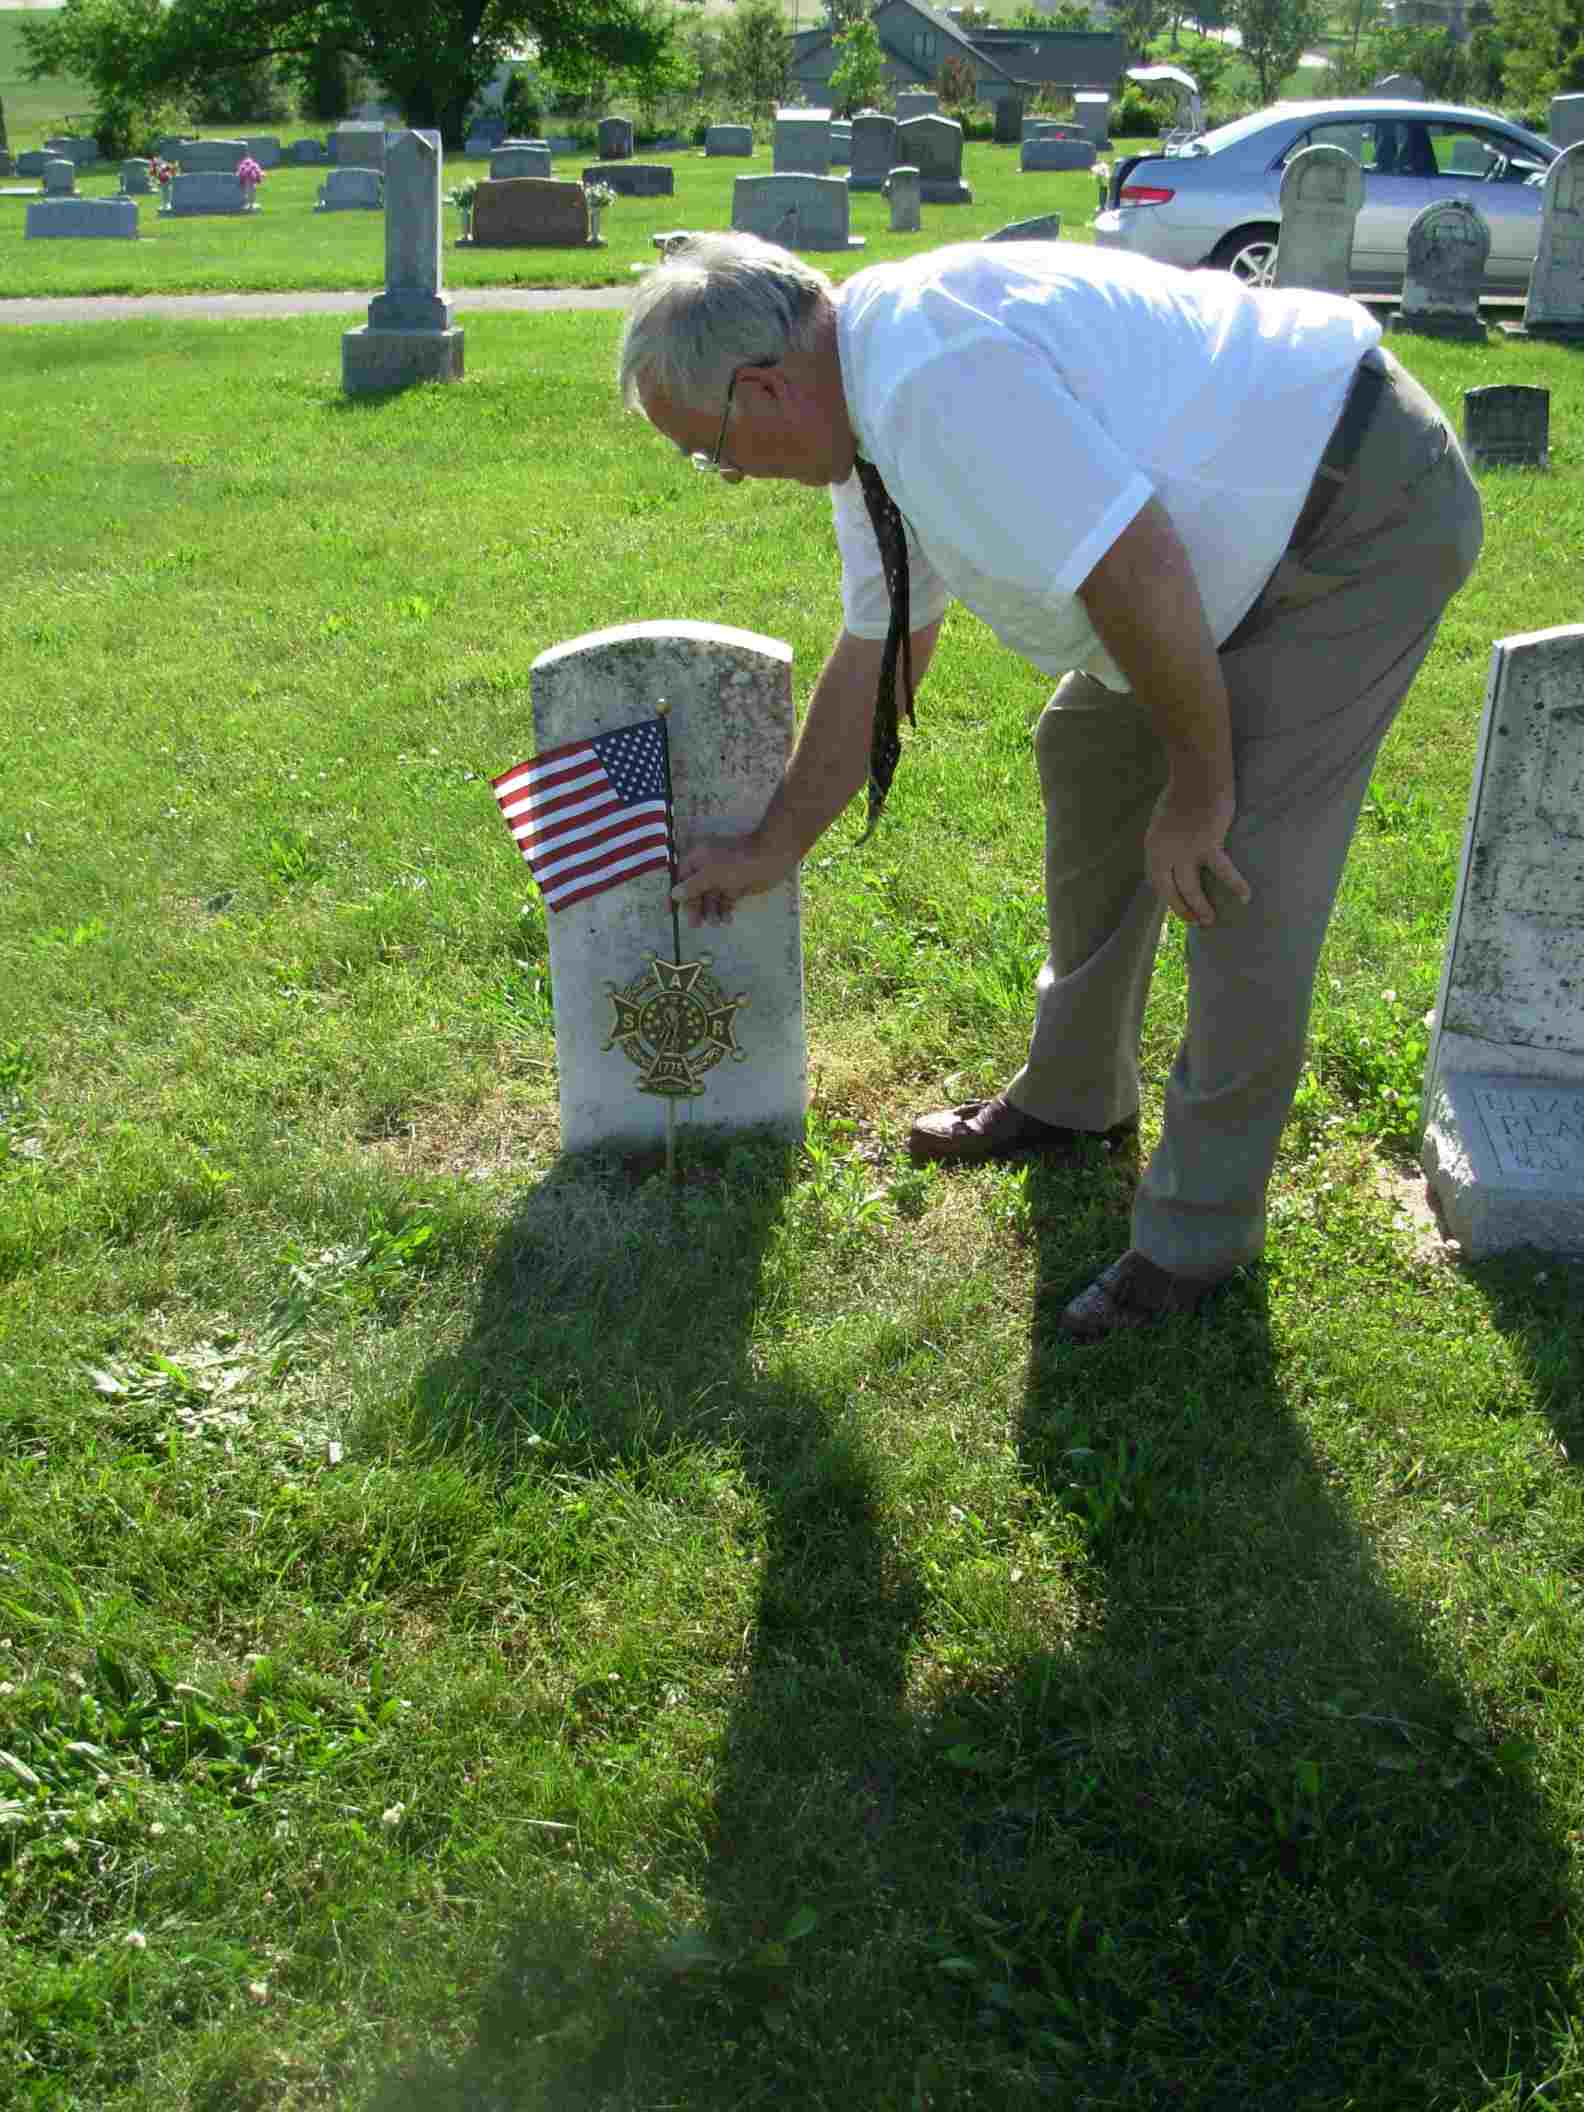 Prospective member Merle Peachee completes the SAR gravemarking of his ancestor Pvt. Benjamin Peachee by placing a flag in the marker.